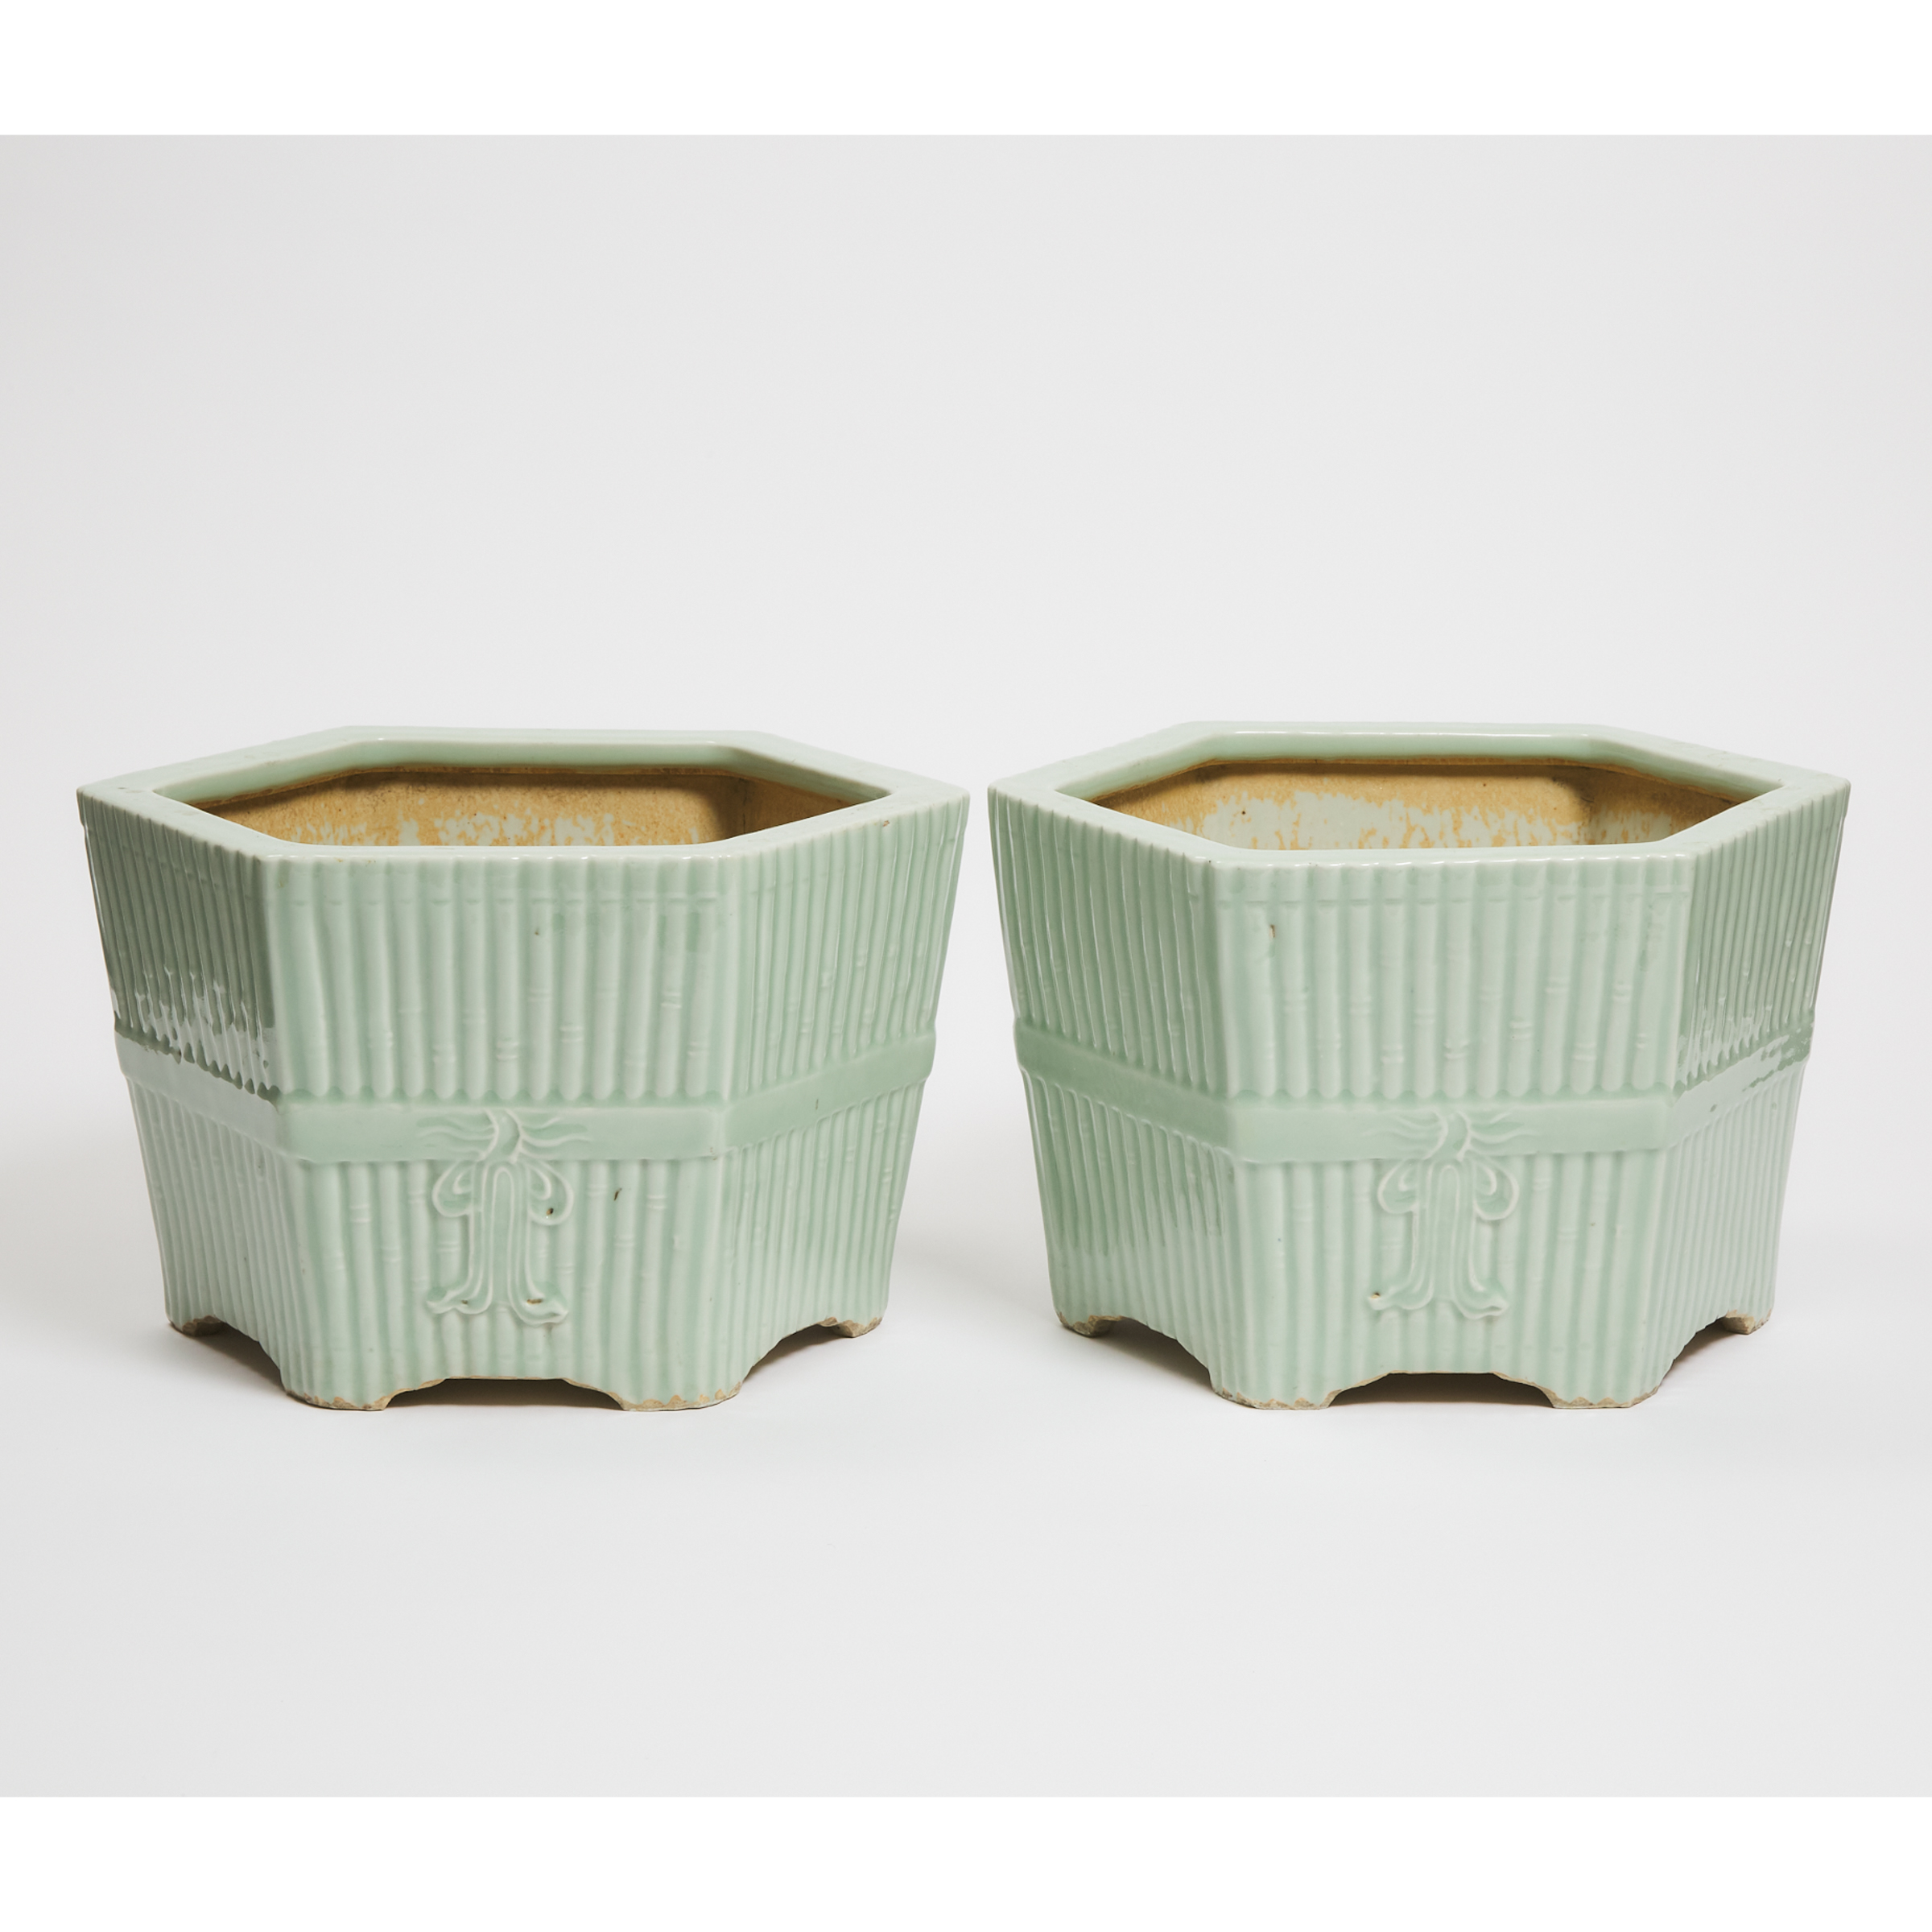 A Pair of Chinese Celadon-Glazed Hexagonal 'Bamboo' Jardinières, Late Qing/Republican Period